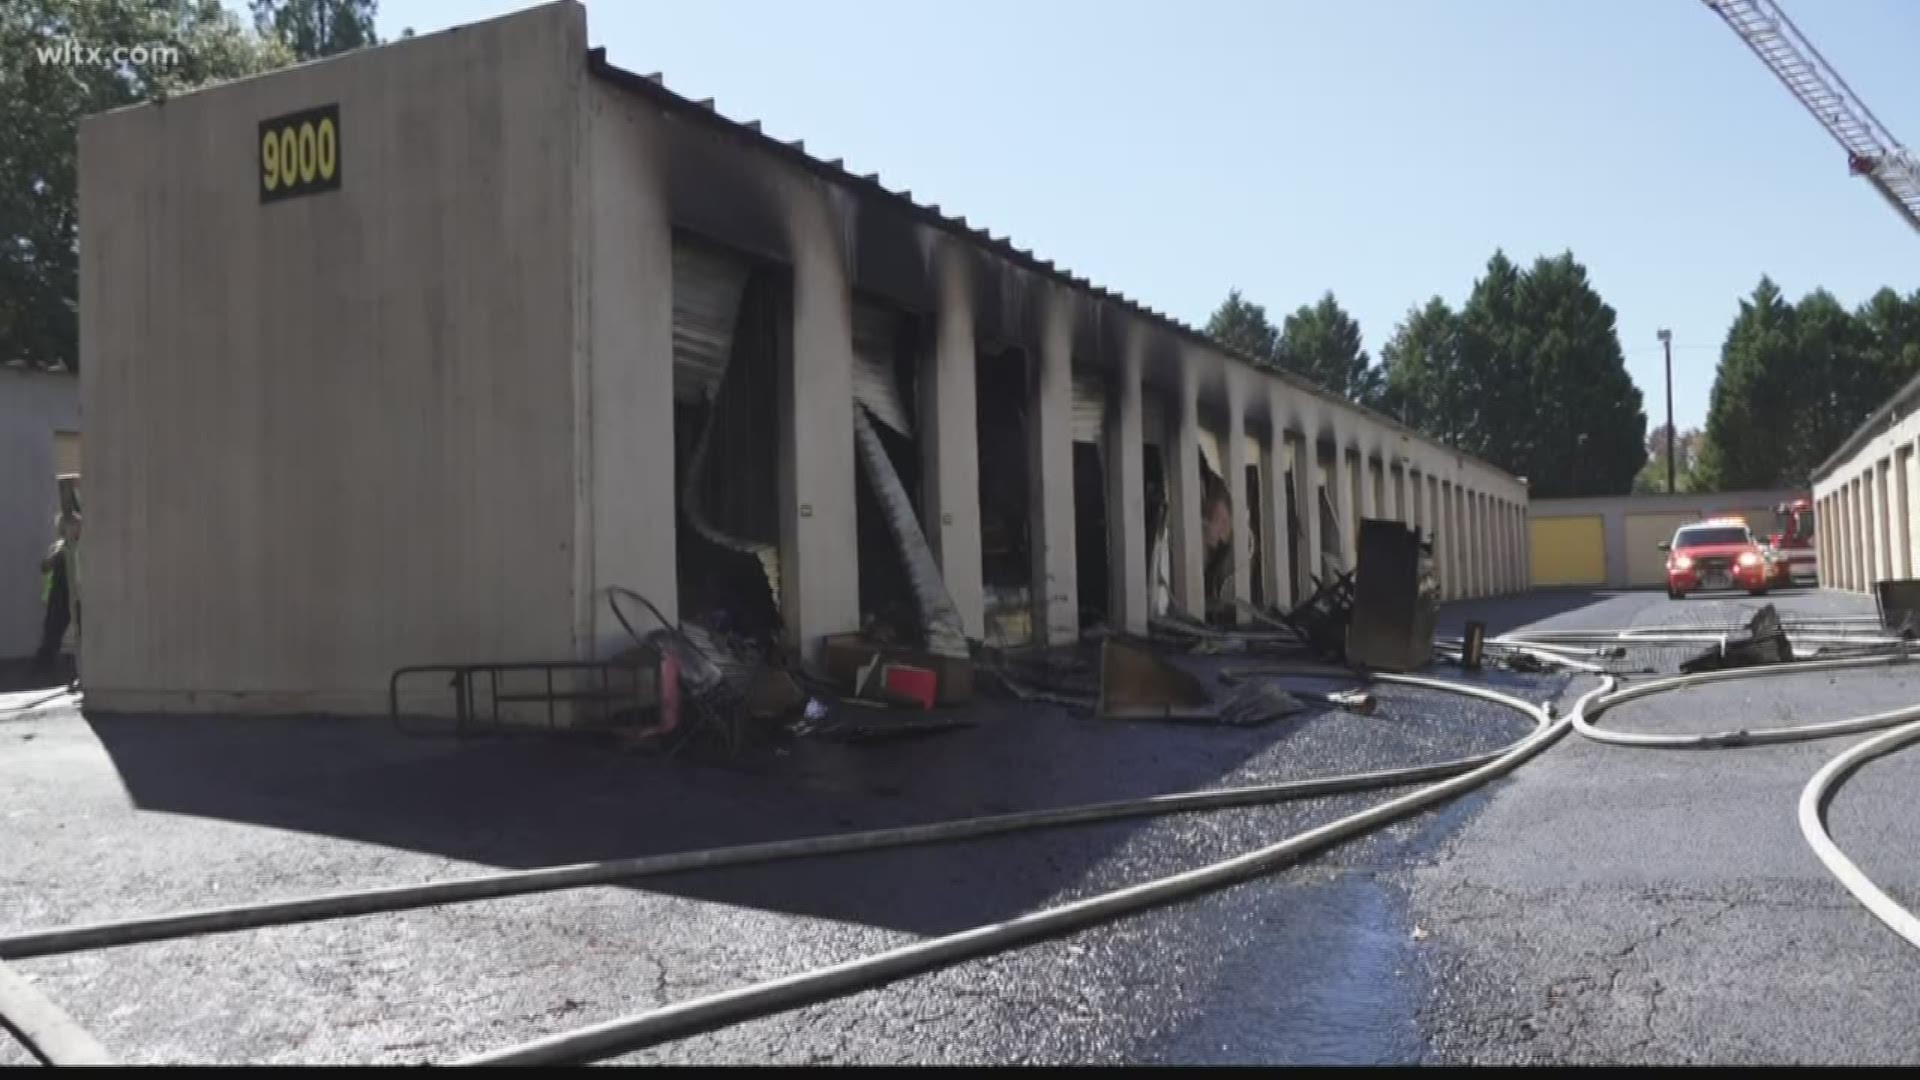 A fire at a Garner's Ferry storage facility today caused at least $50,000 in damage to several units.